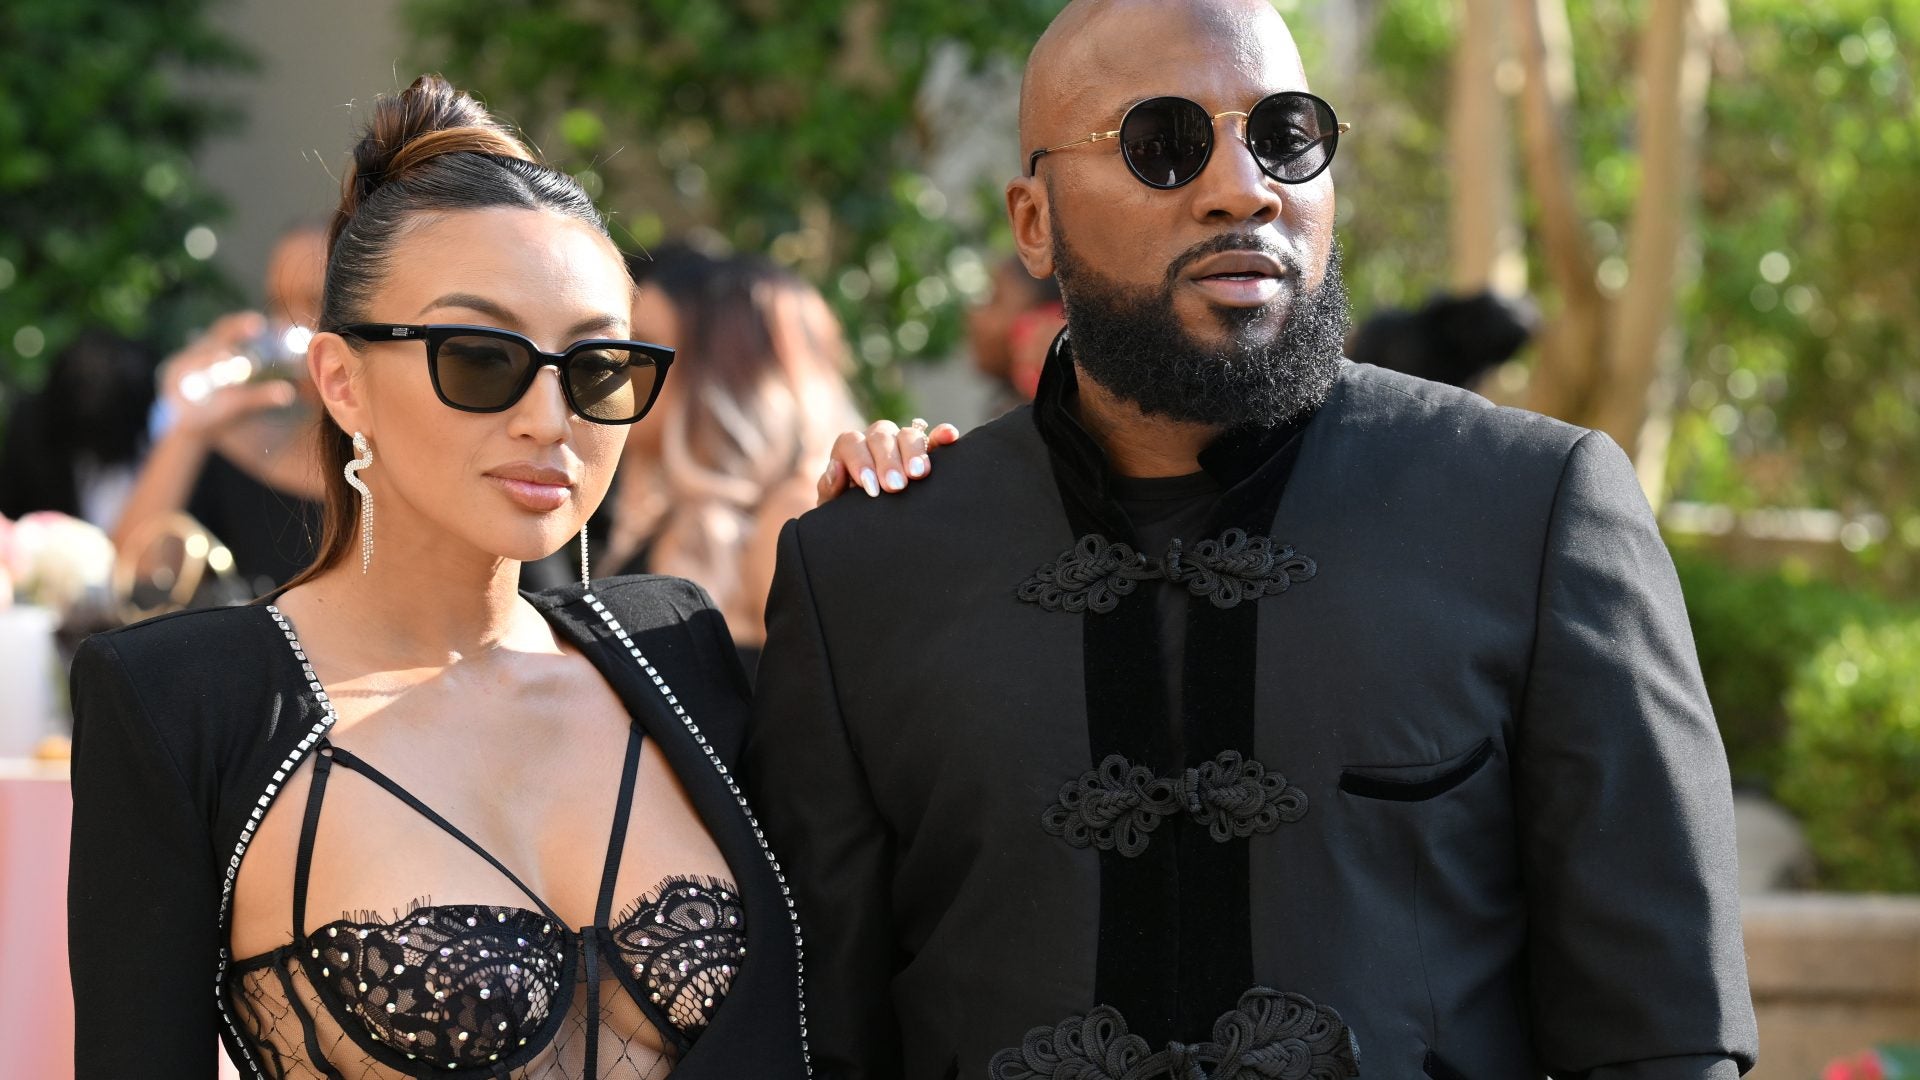 Jeezy Publicly Responds To Jeannie Mai's Claims Of Domestic Violence: 'Y'all Know Me'